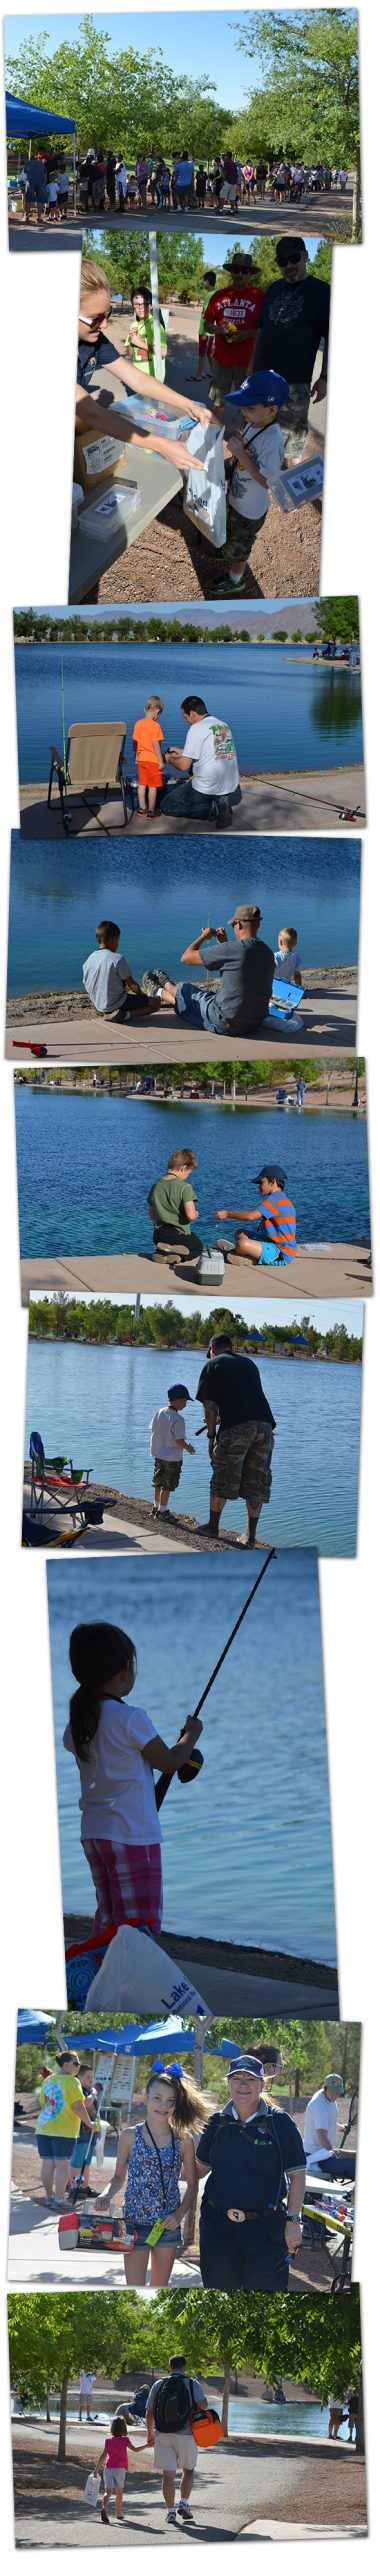 Free Fishing Day in Boulder City, Nevada